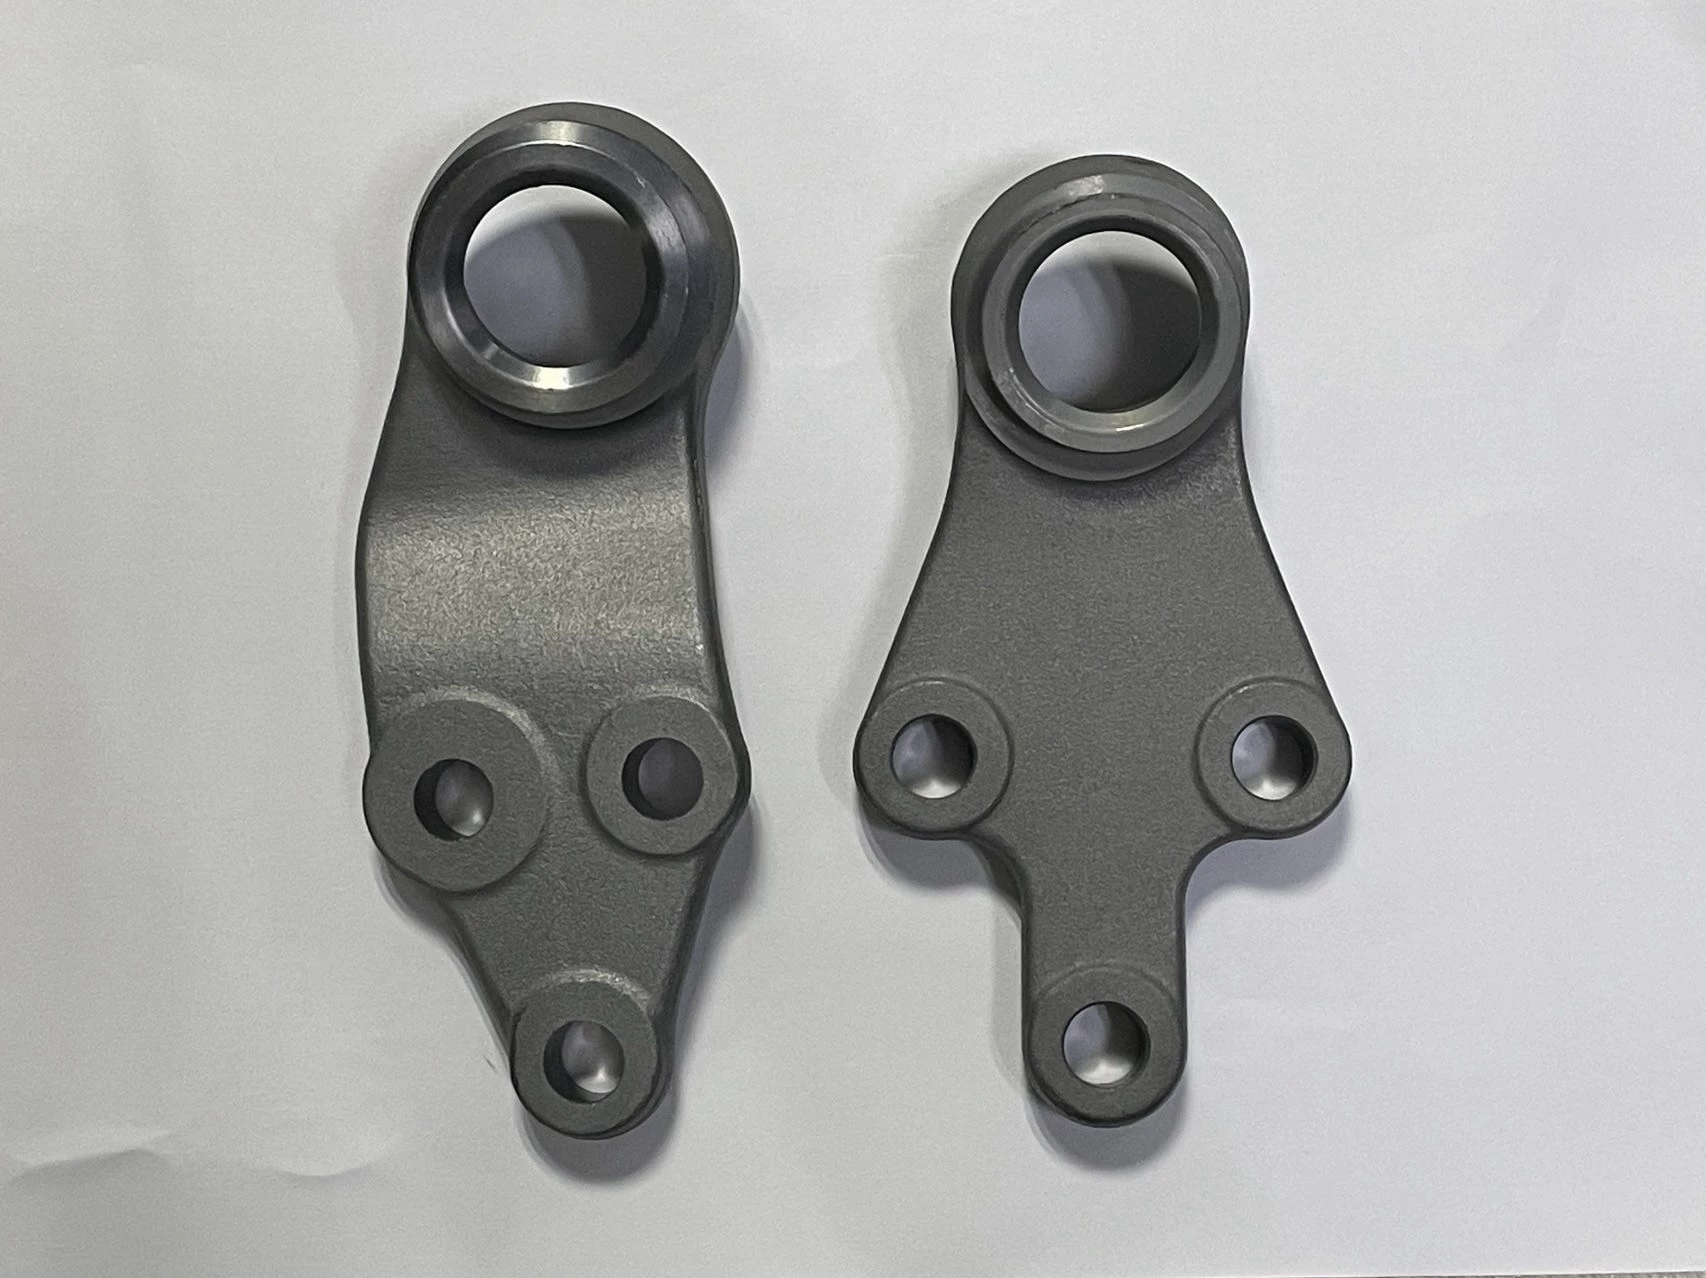 Automobile ball joint, steering knuckles,socket joint,forged joint.